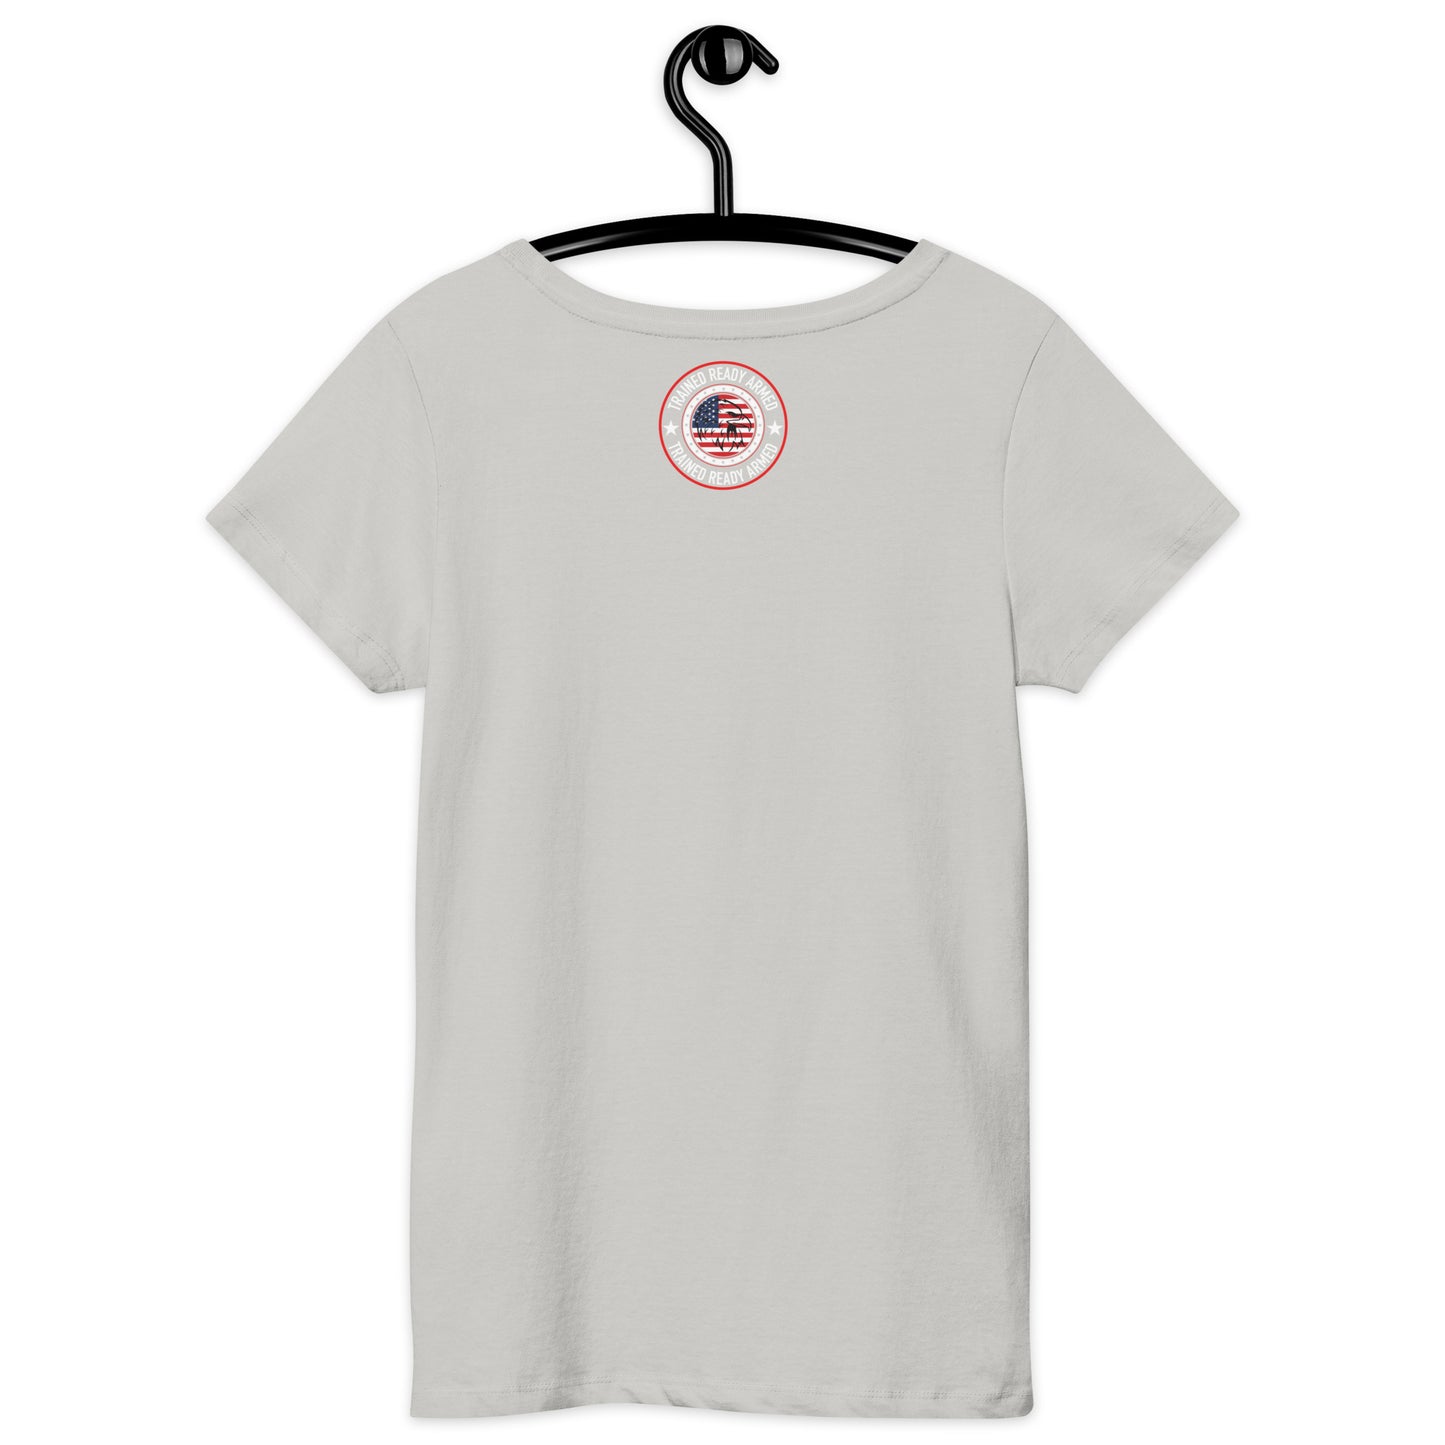 TRA USA Women’s basic organic t-shirt - Trained Ready Armed Apparel